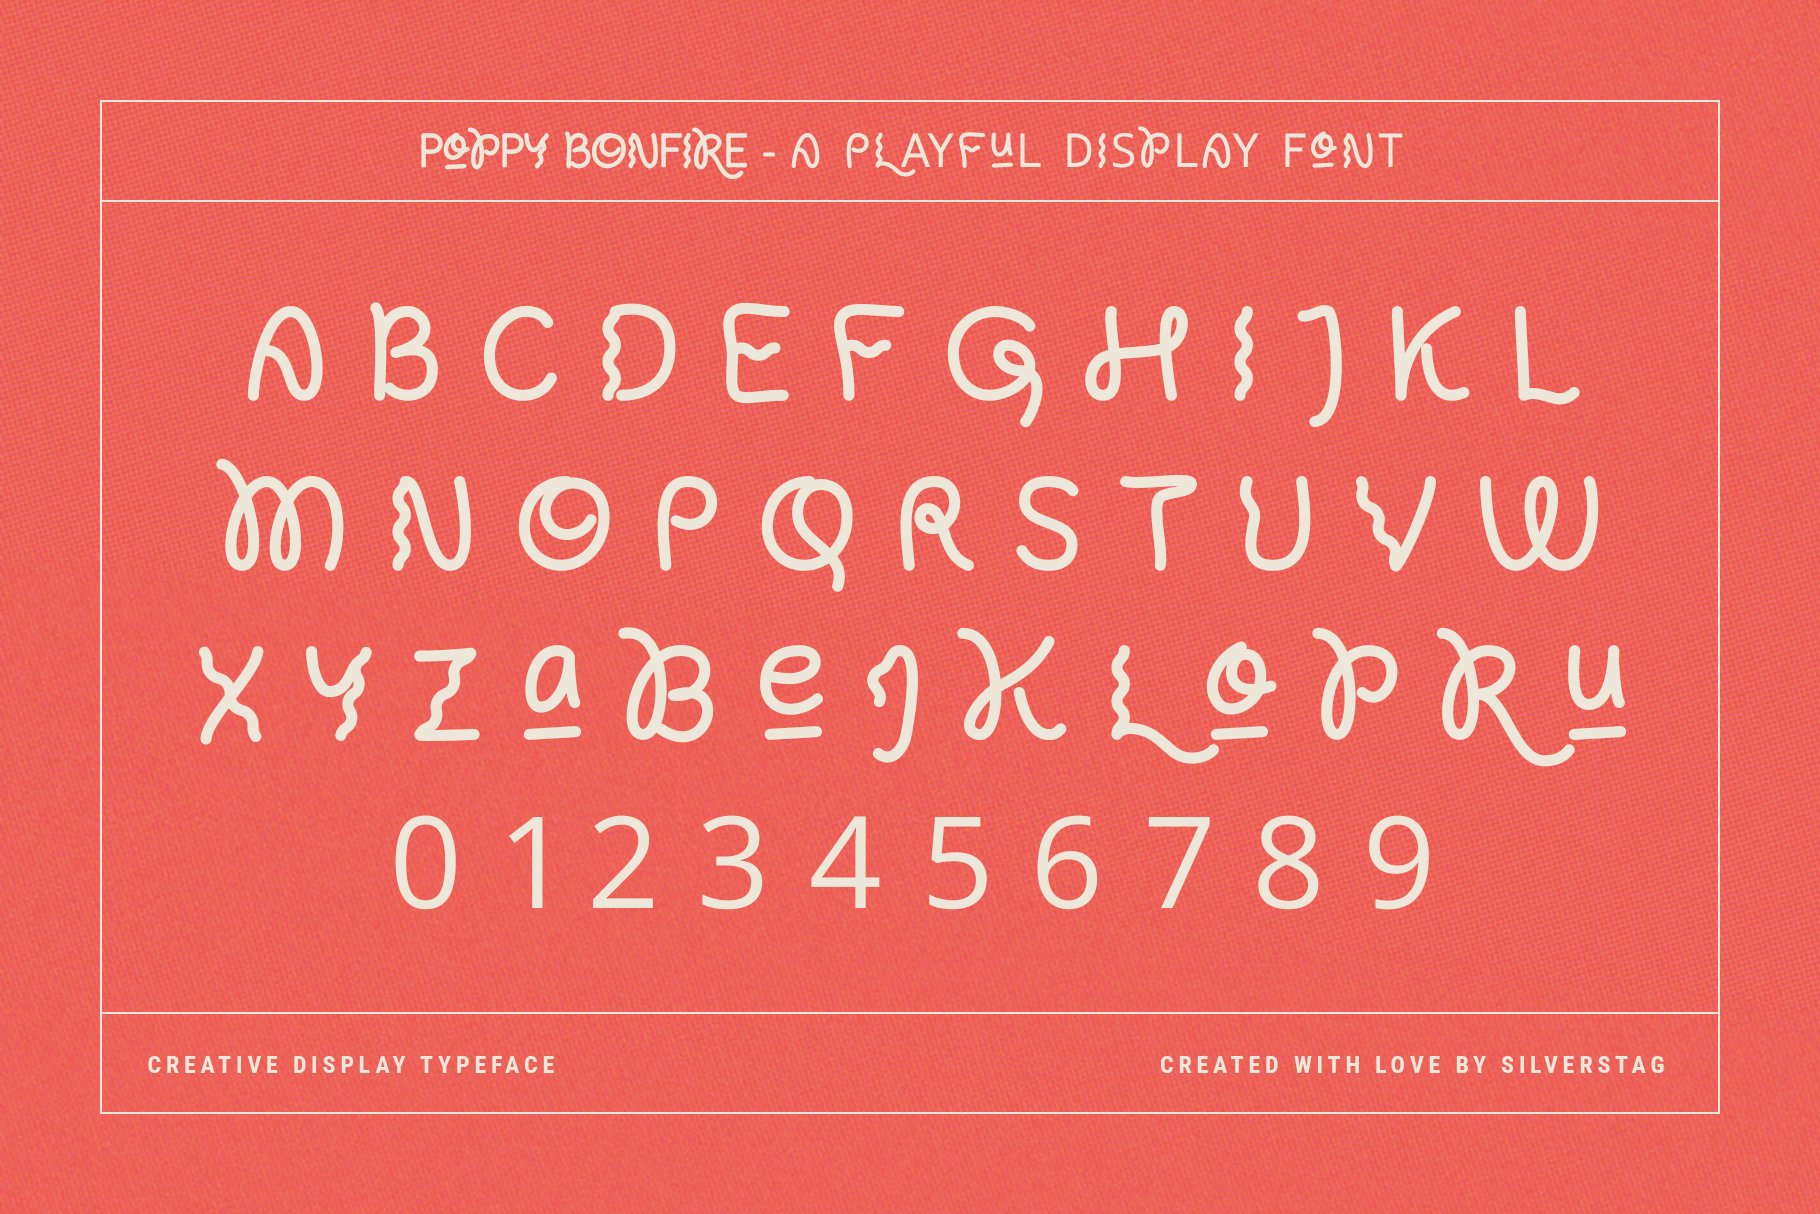 11 poppy bonfire playful display font by silverstag 196